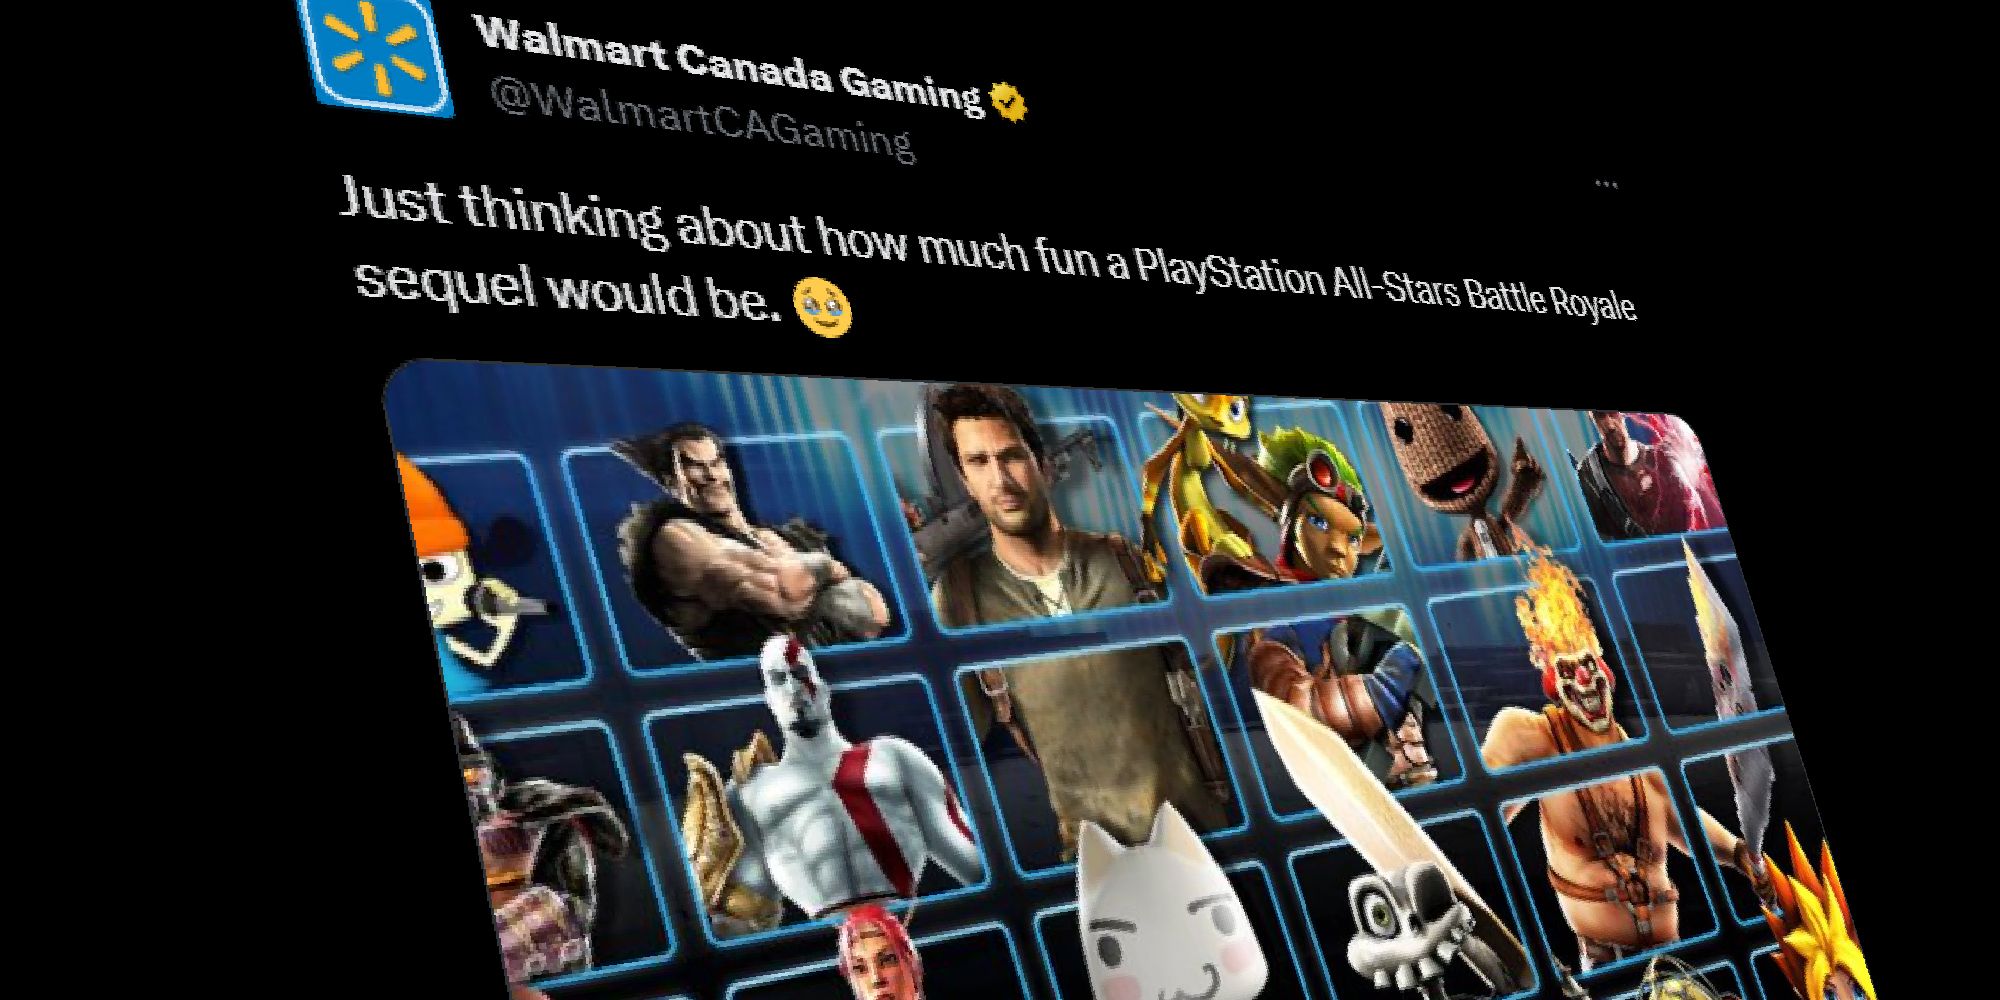 Walmart Canada Gaming tweeting a photo of PlayStation All-Stars Battle Royale, discussing how it wants a sequel